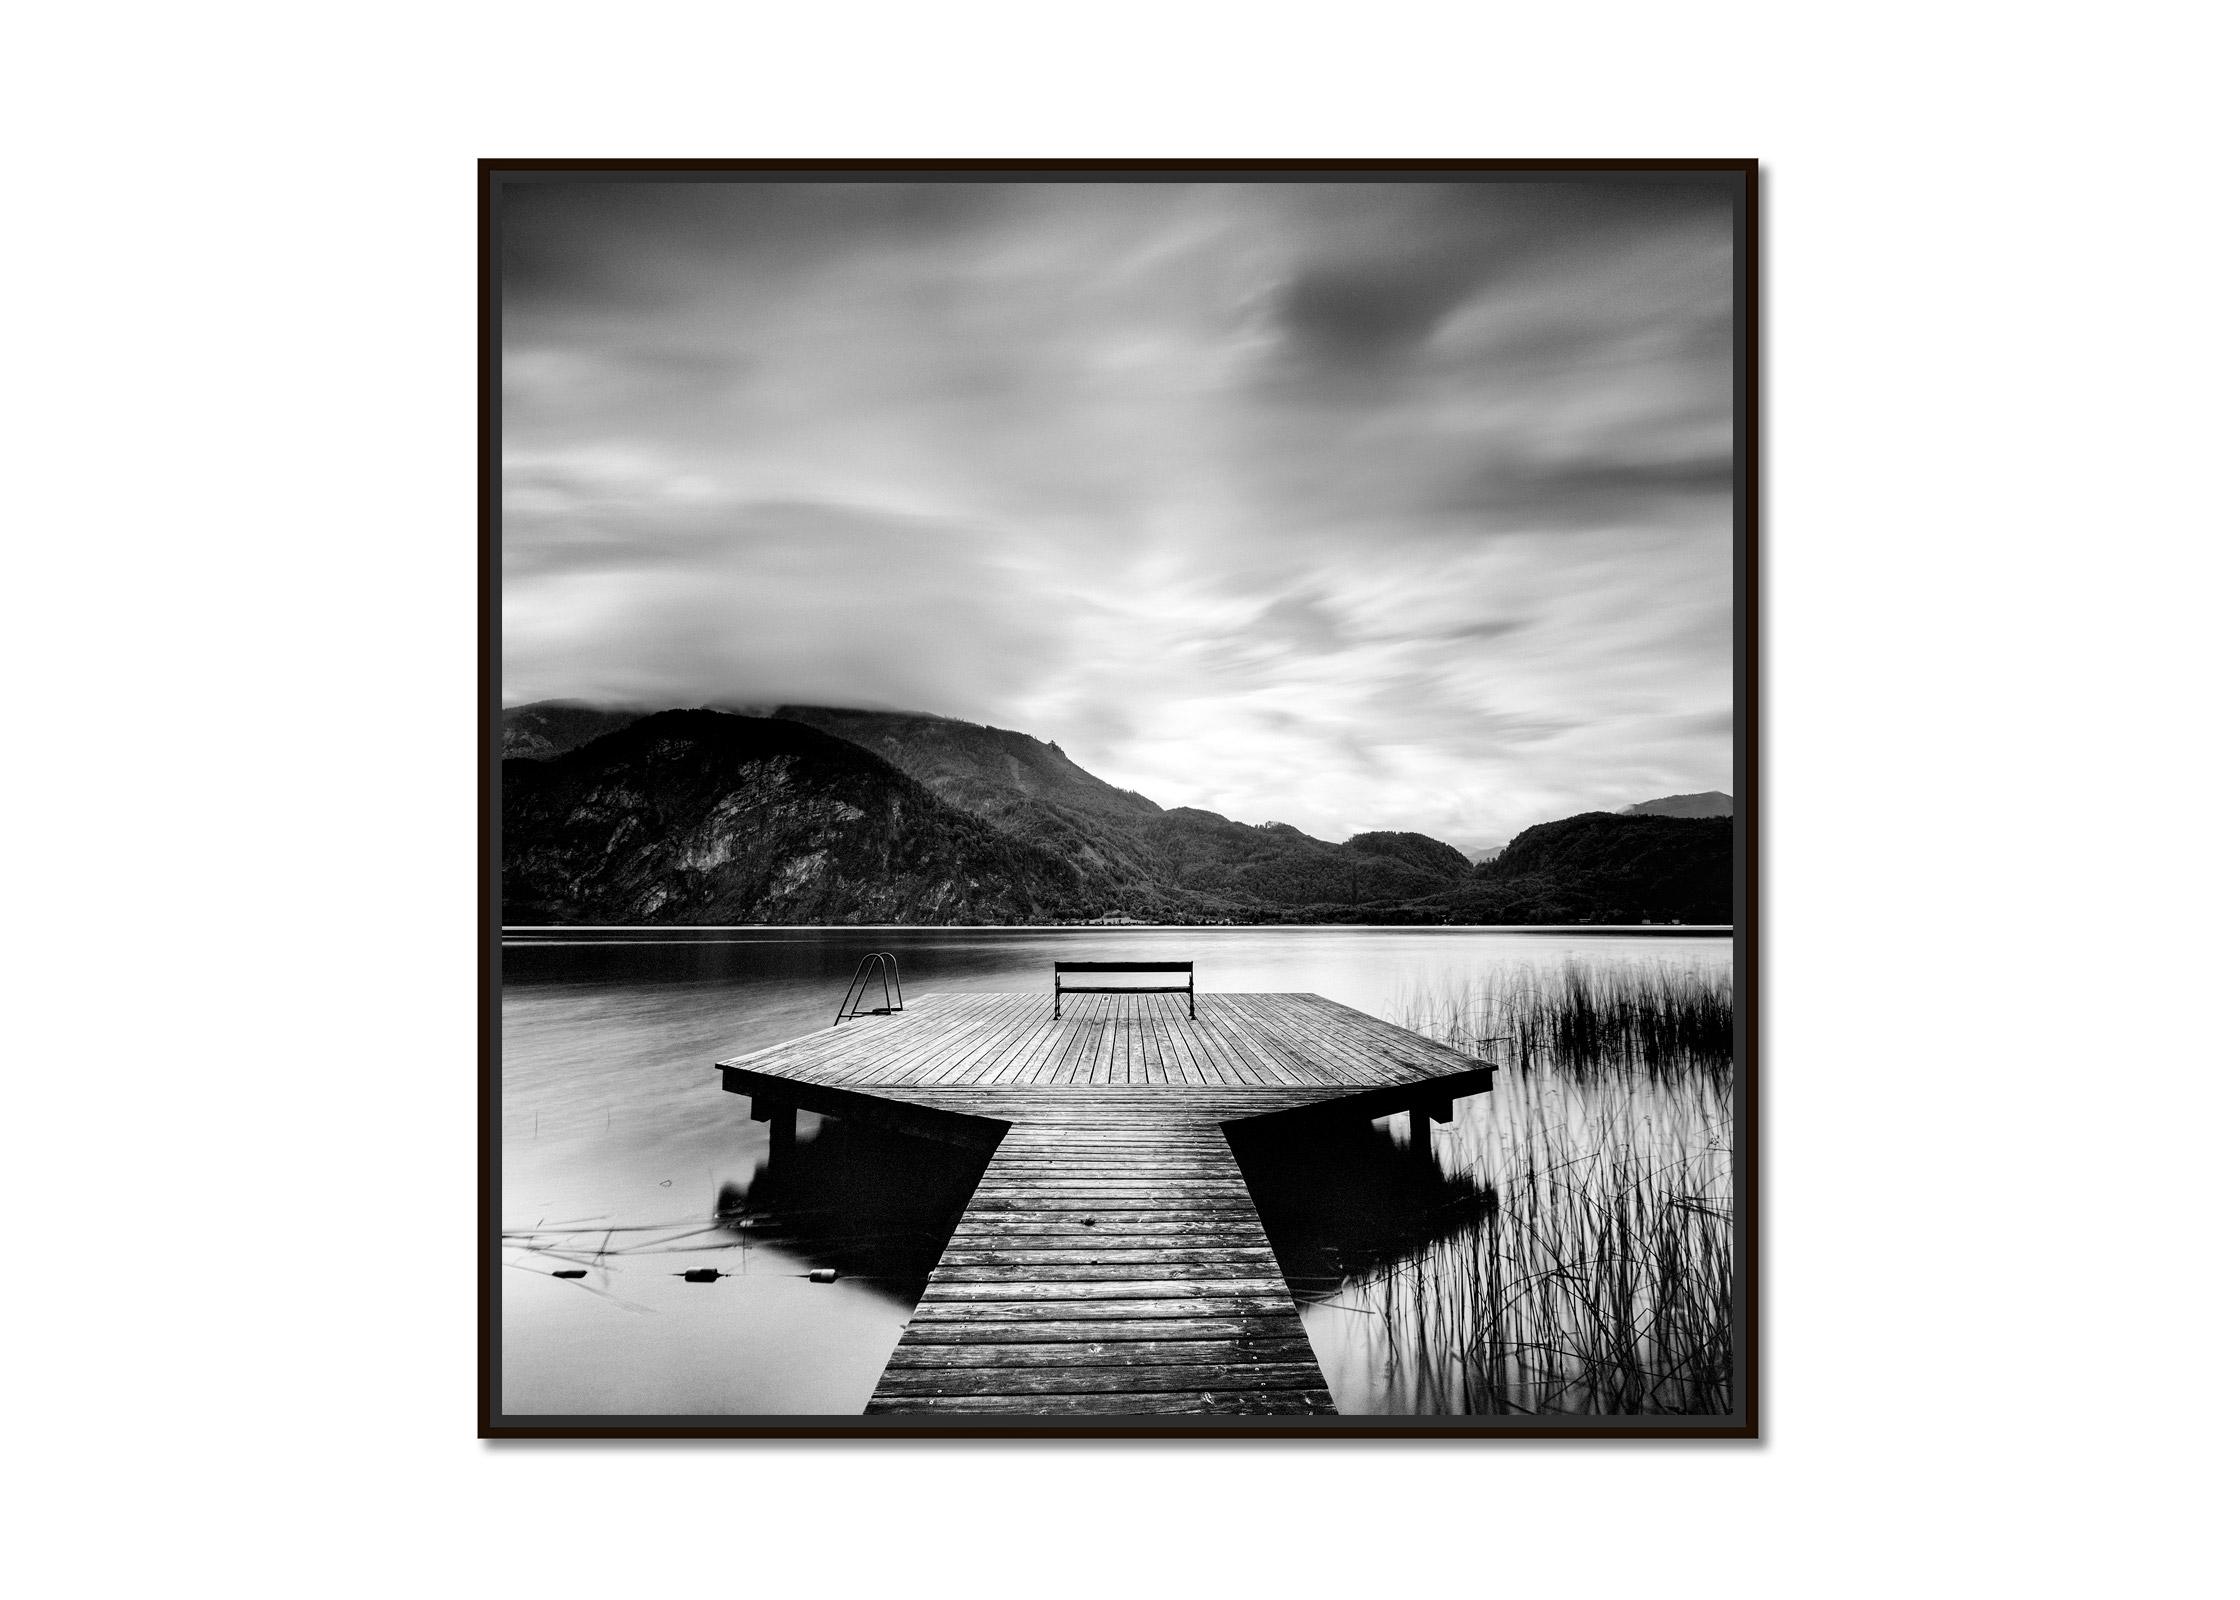 Wood Pier, lake, cloudy, storm, black and white photography, fine art waterscape - Photograph by Gerald Berghammer